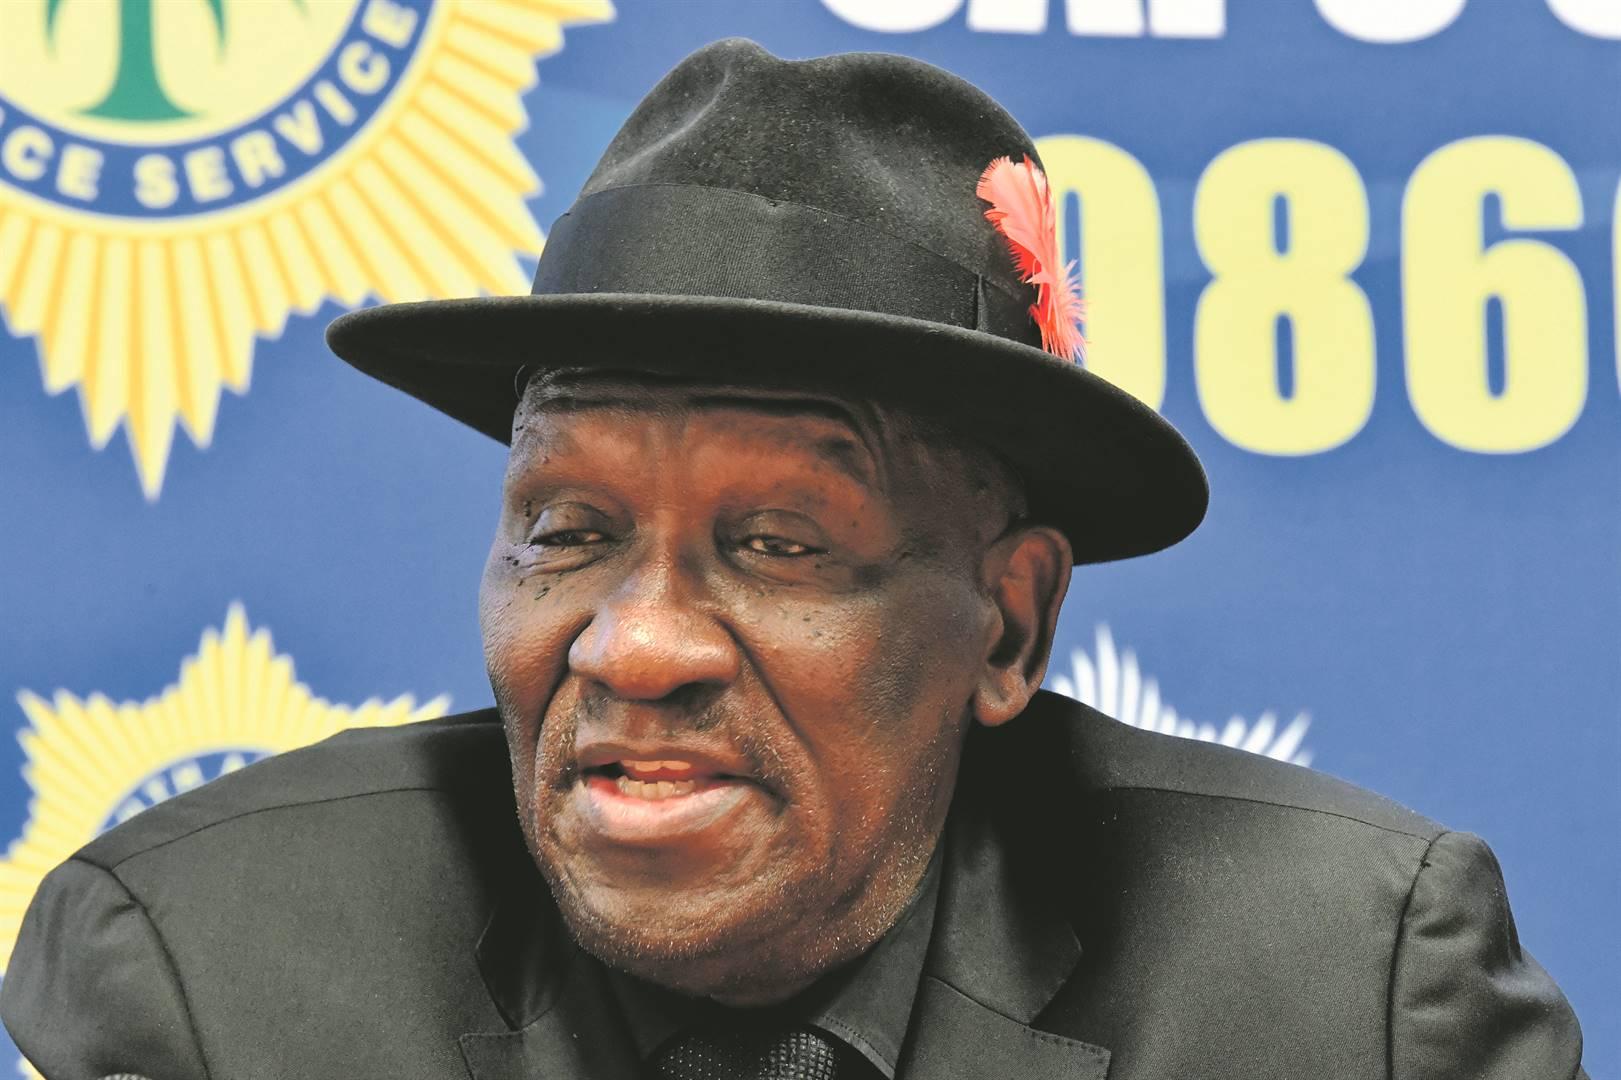 DA wants Cele sacked for saying Krugersdorp victim 'lucky, if it is lucky' to be raped by only one man